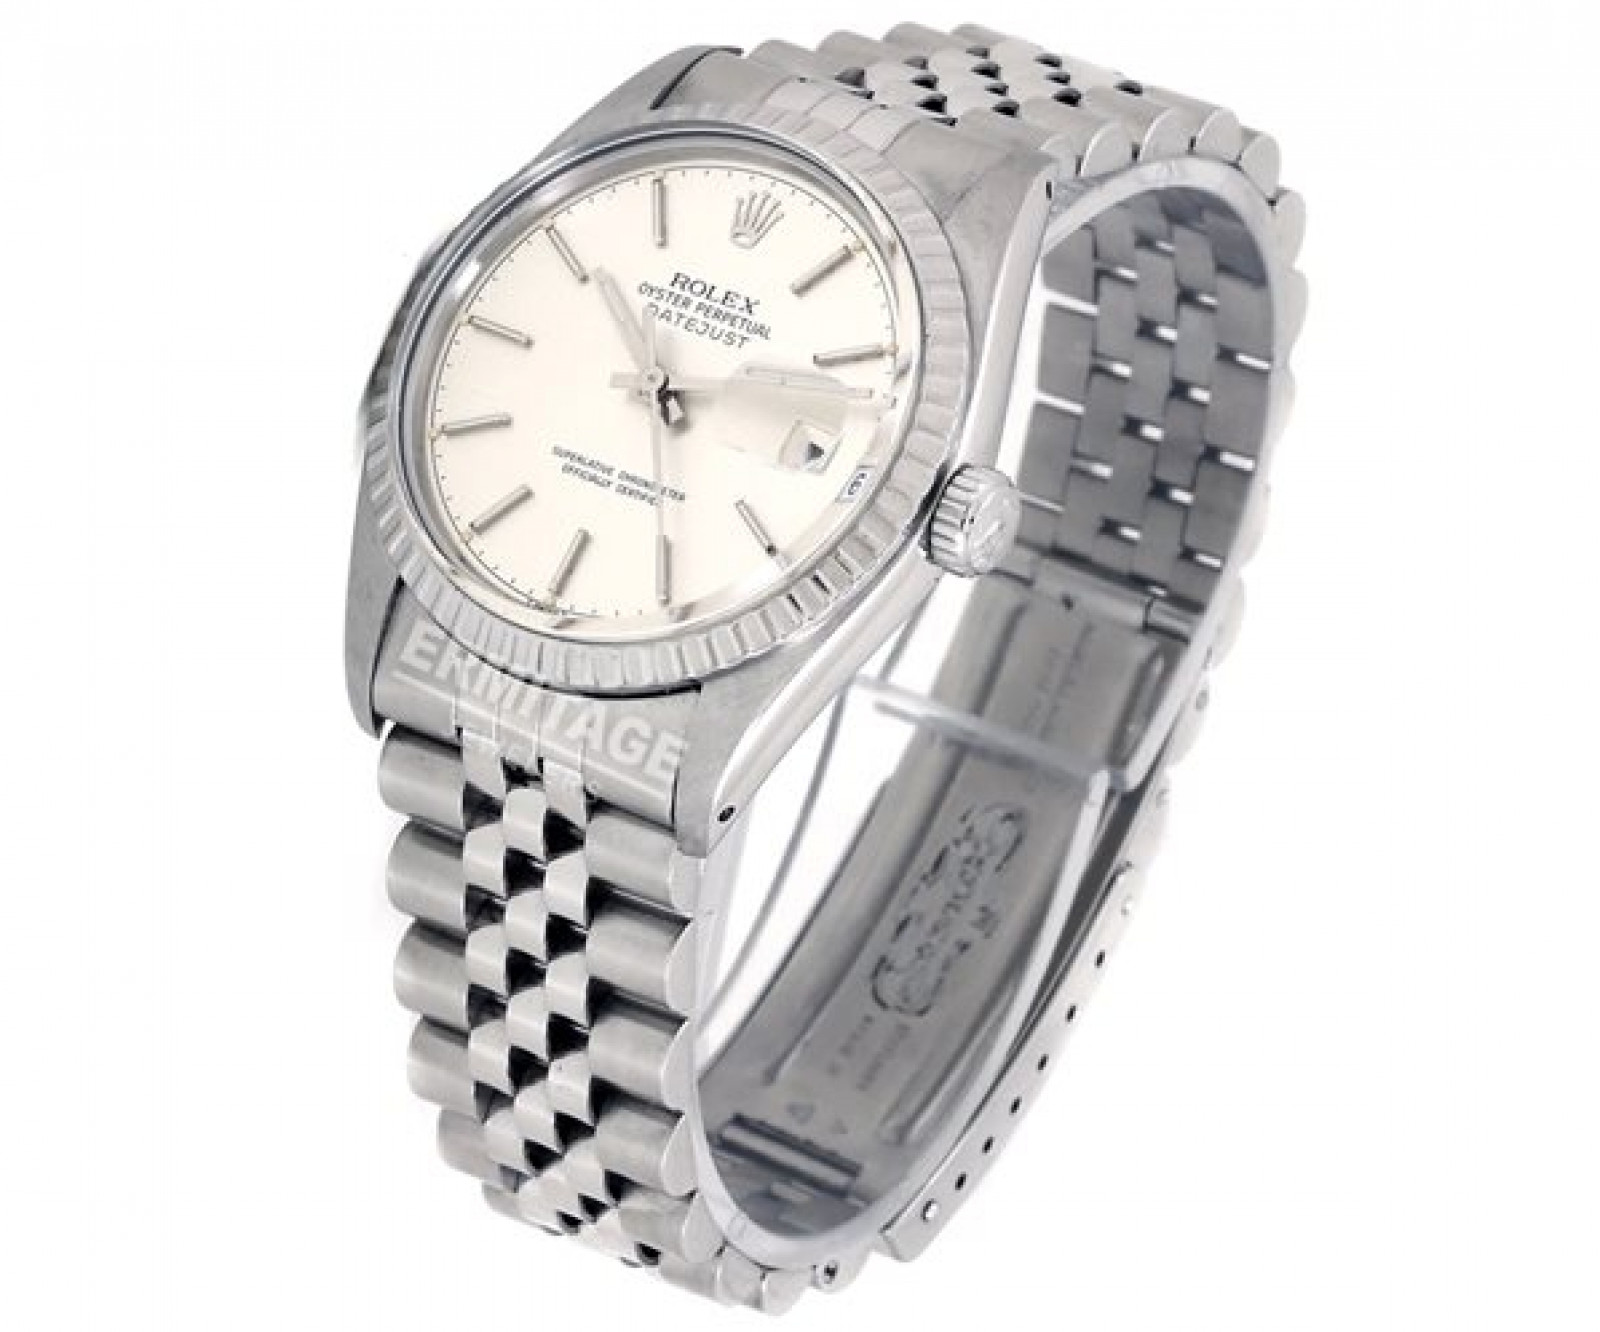 Rolex Datejust 16030 with Stainless Steel